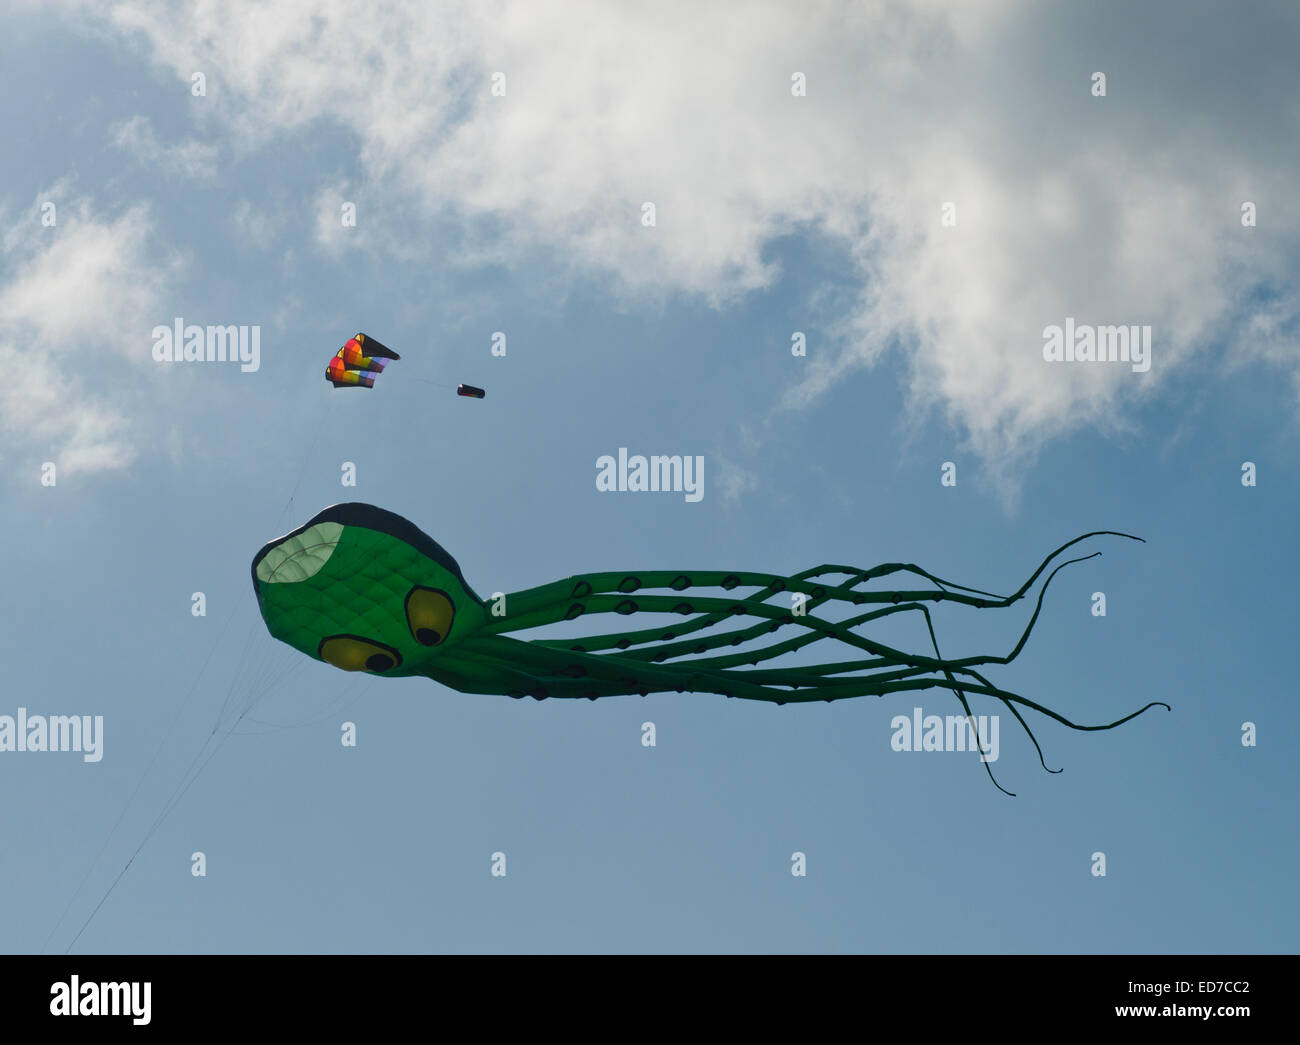 An octopus kite being flown at Hastings, East Sussex Stock Photo